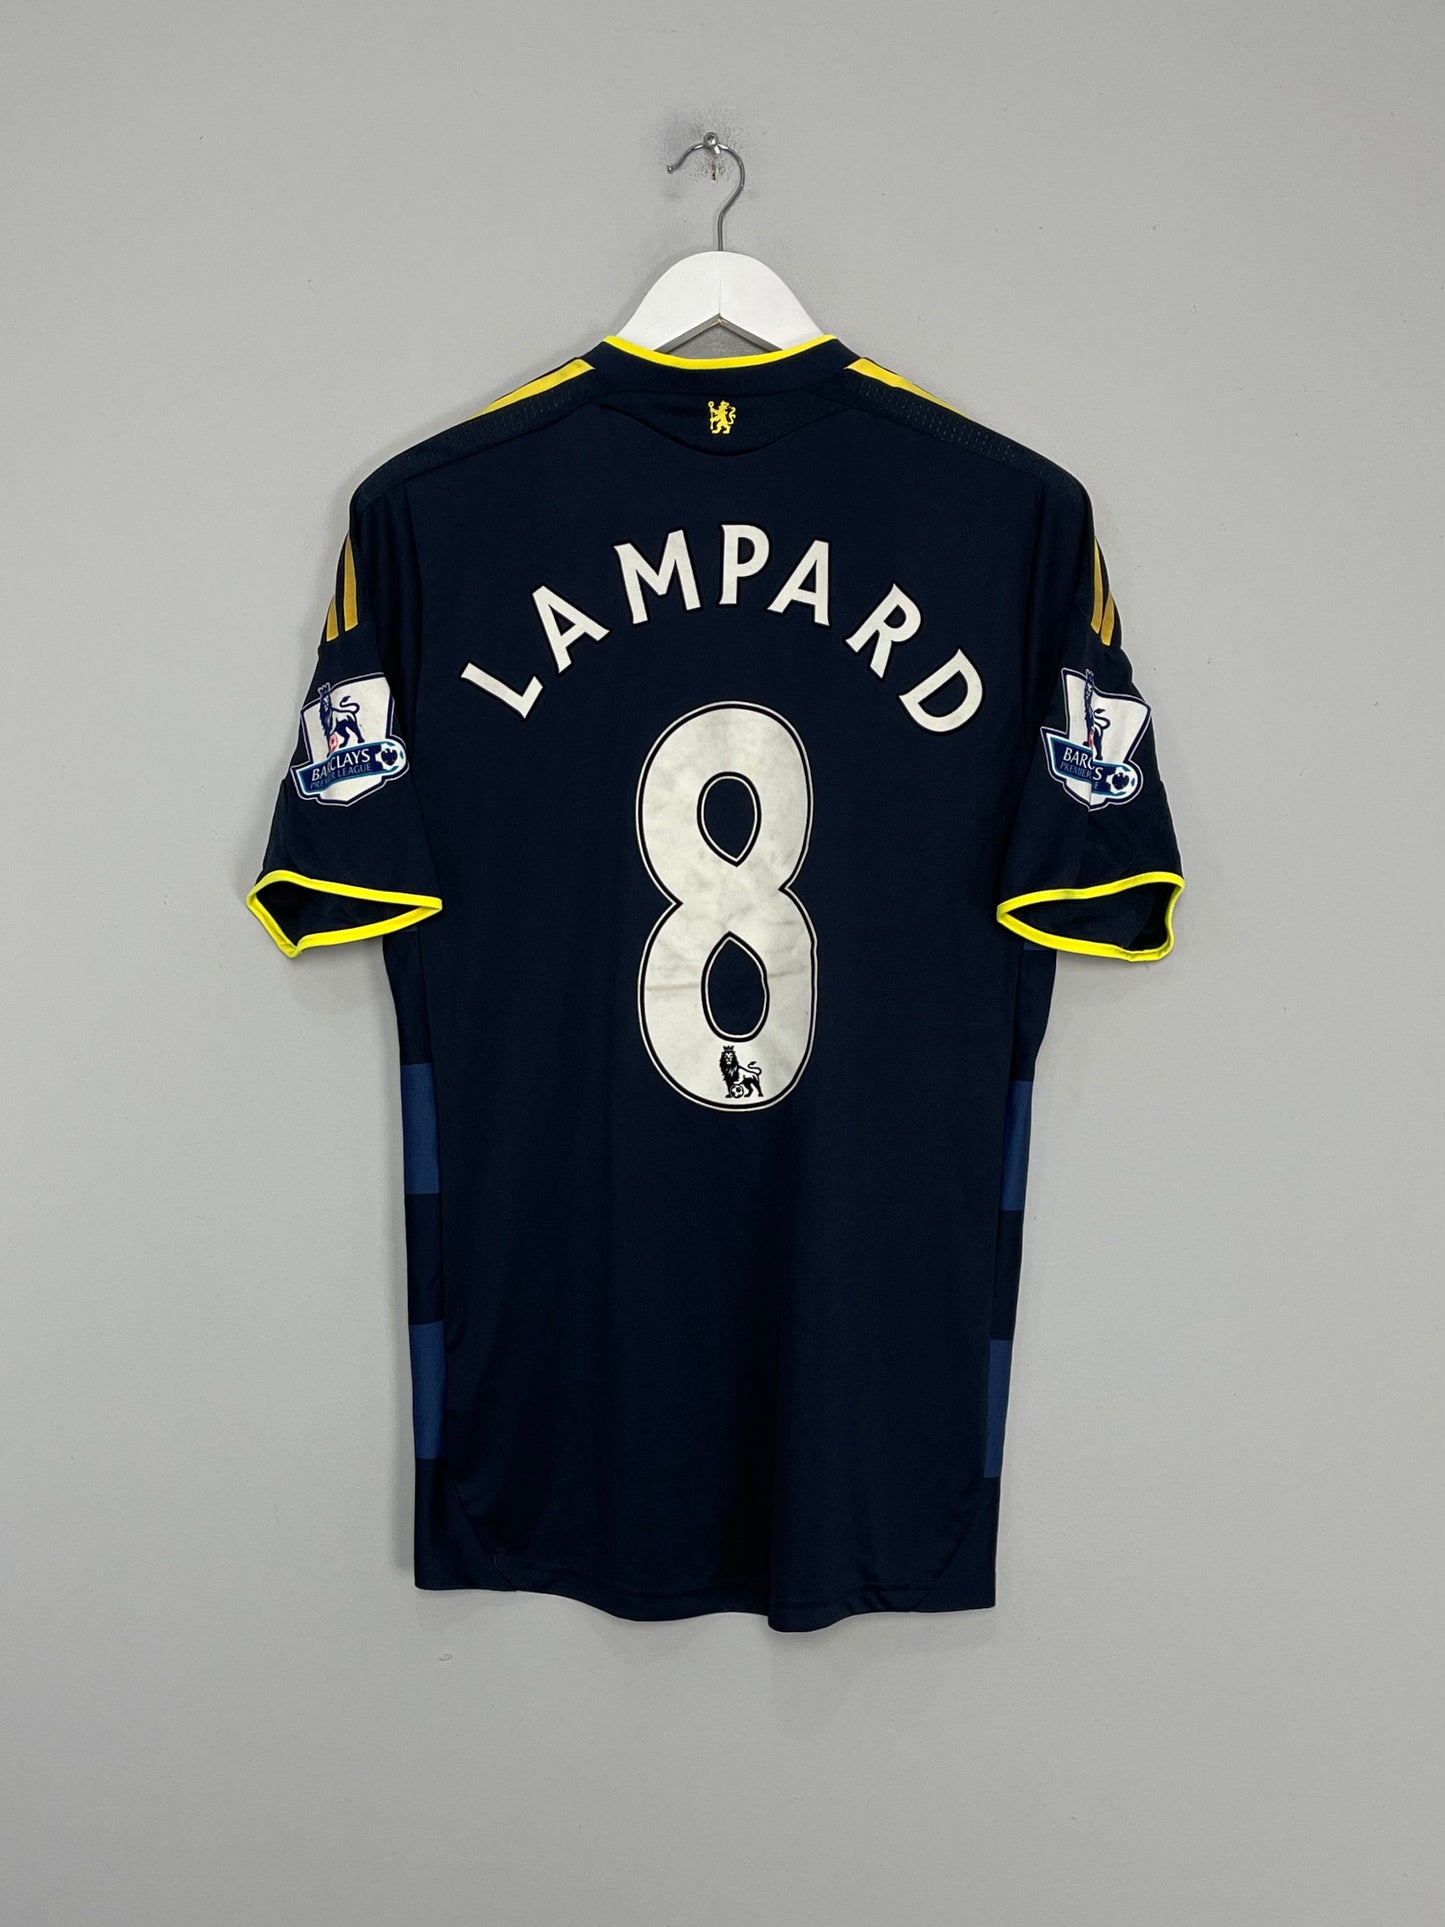 2009/10 CHELSEA LAMPARD #8 *PLAYER ISSUE* AWAY SHIRT (M) ADIDAS